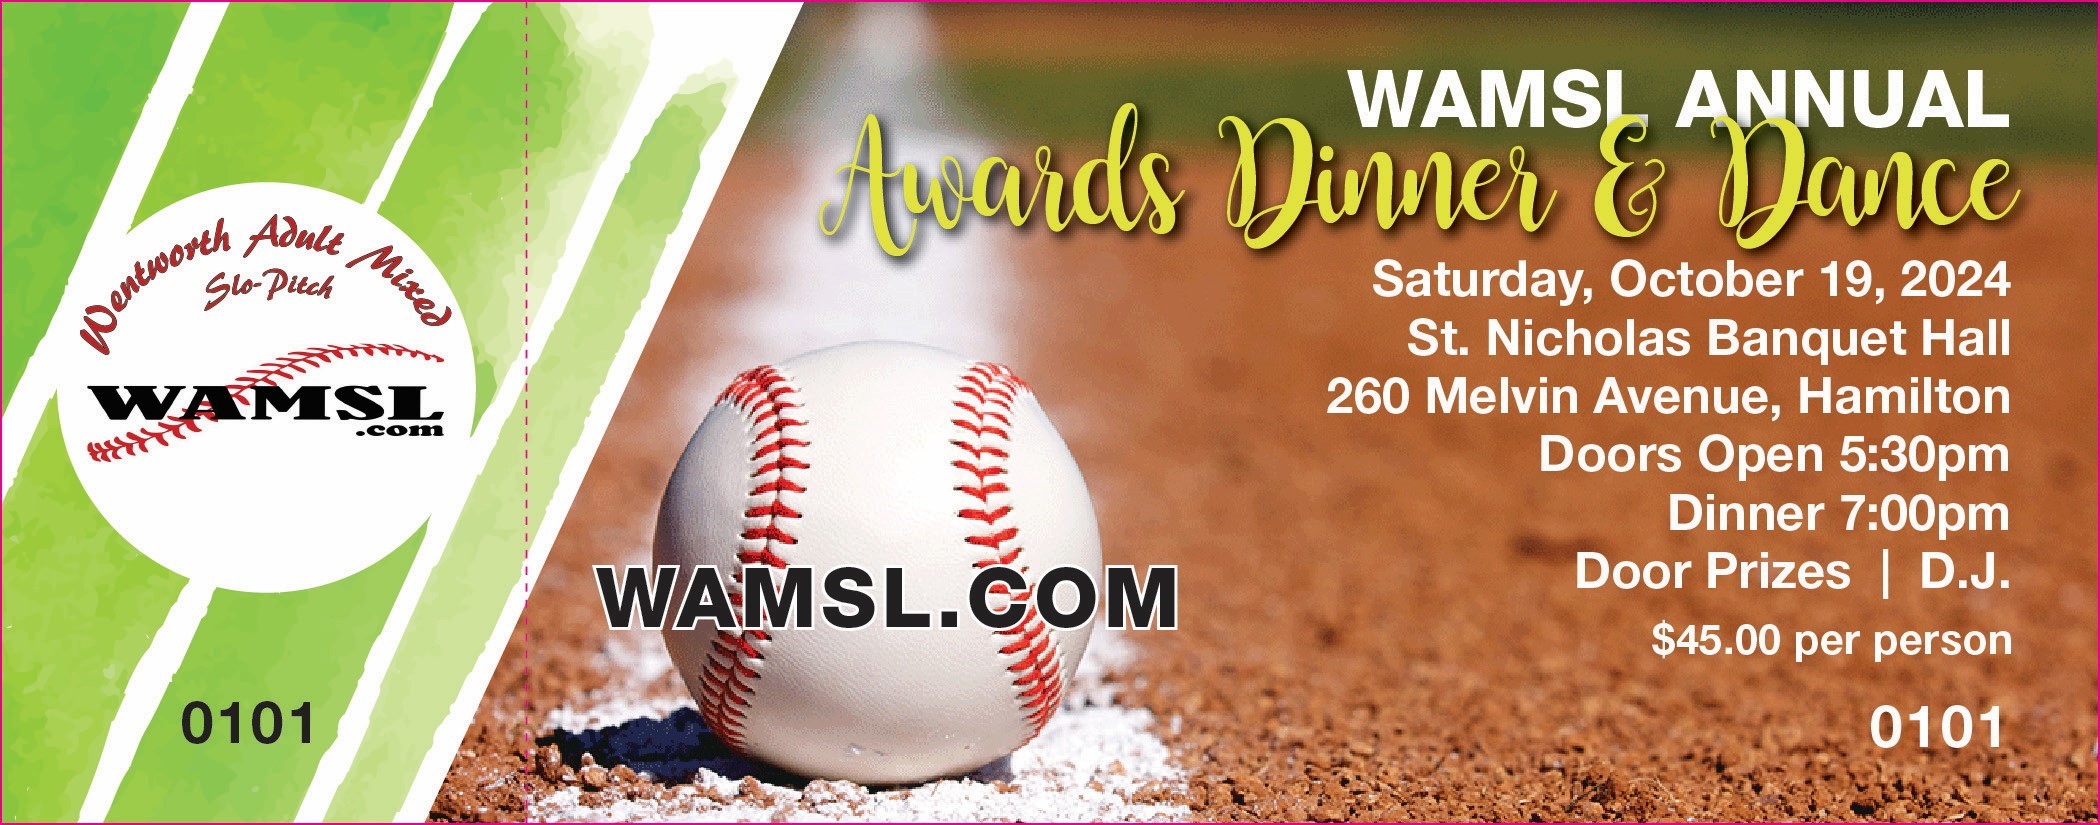 WAMSL 2022 Awards Dinner & Dance - Registration (2 tickets per team) -(Additional Team Tickets Are For Sale @ $40.00 per person) - Contact Linda info@wamsl.com